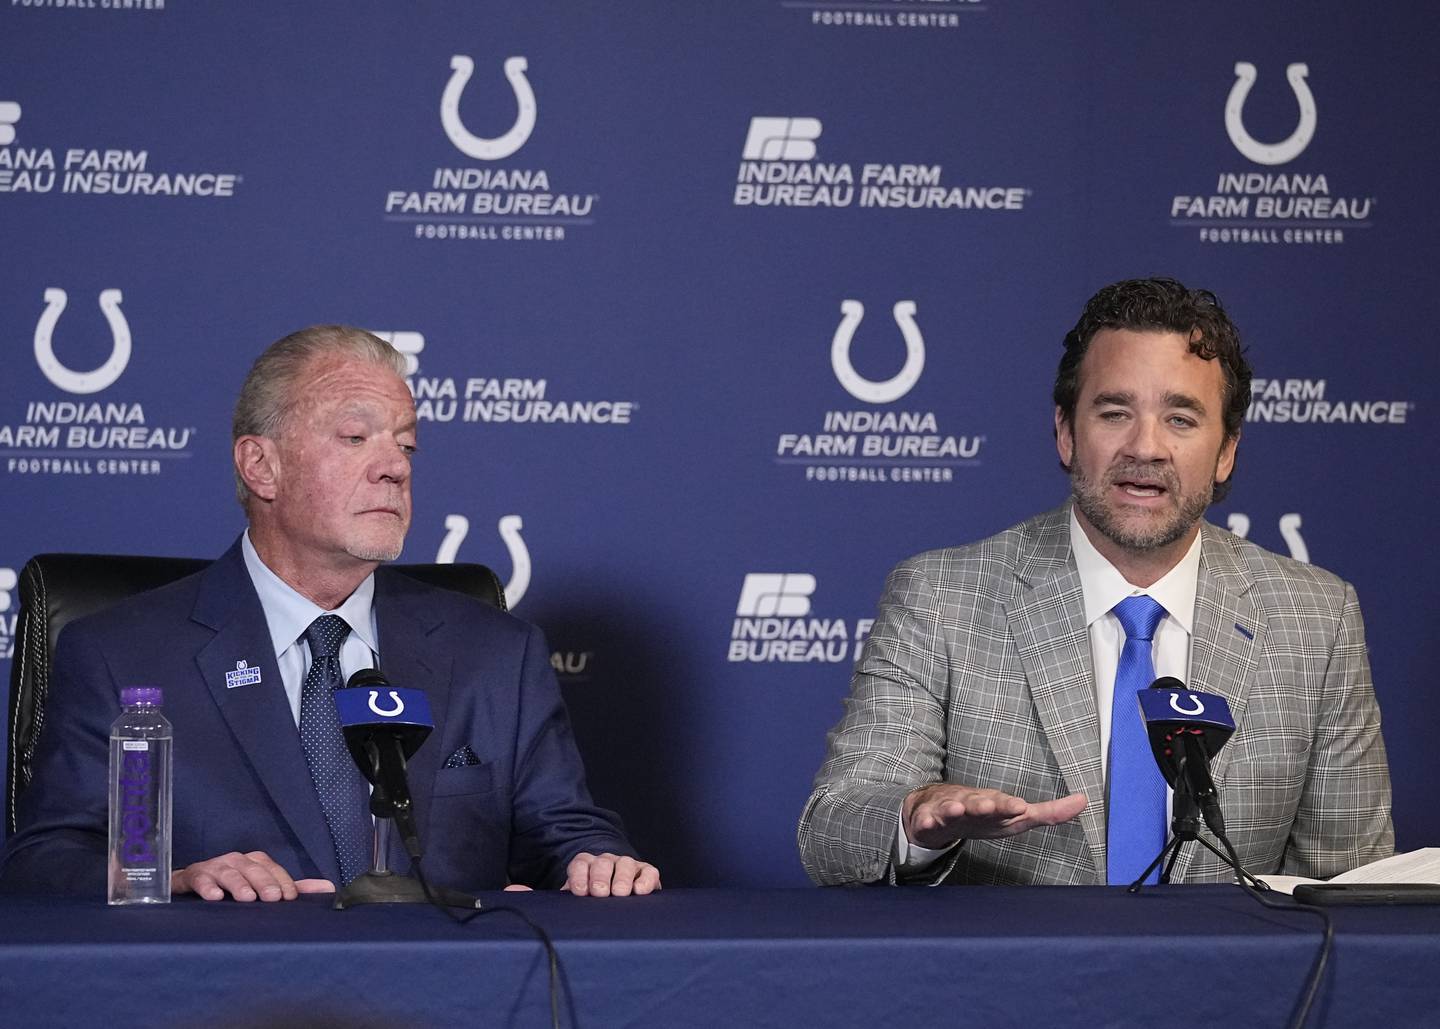 Colts interim coach Jeff Saturday speaks as owner Jim Irsay listens during a news conference on Nov. 7, 2022.